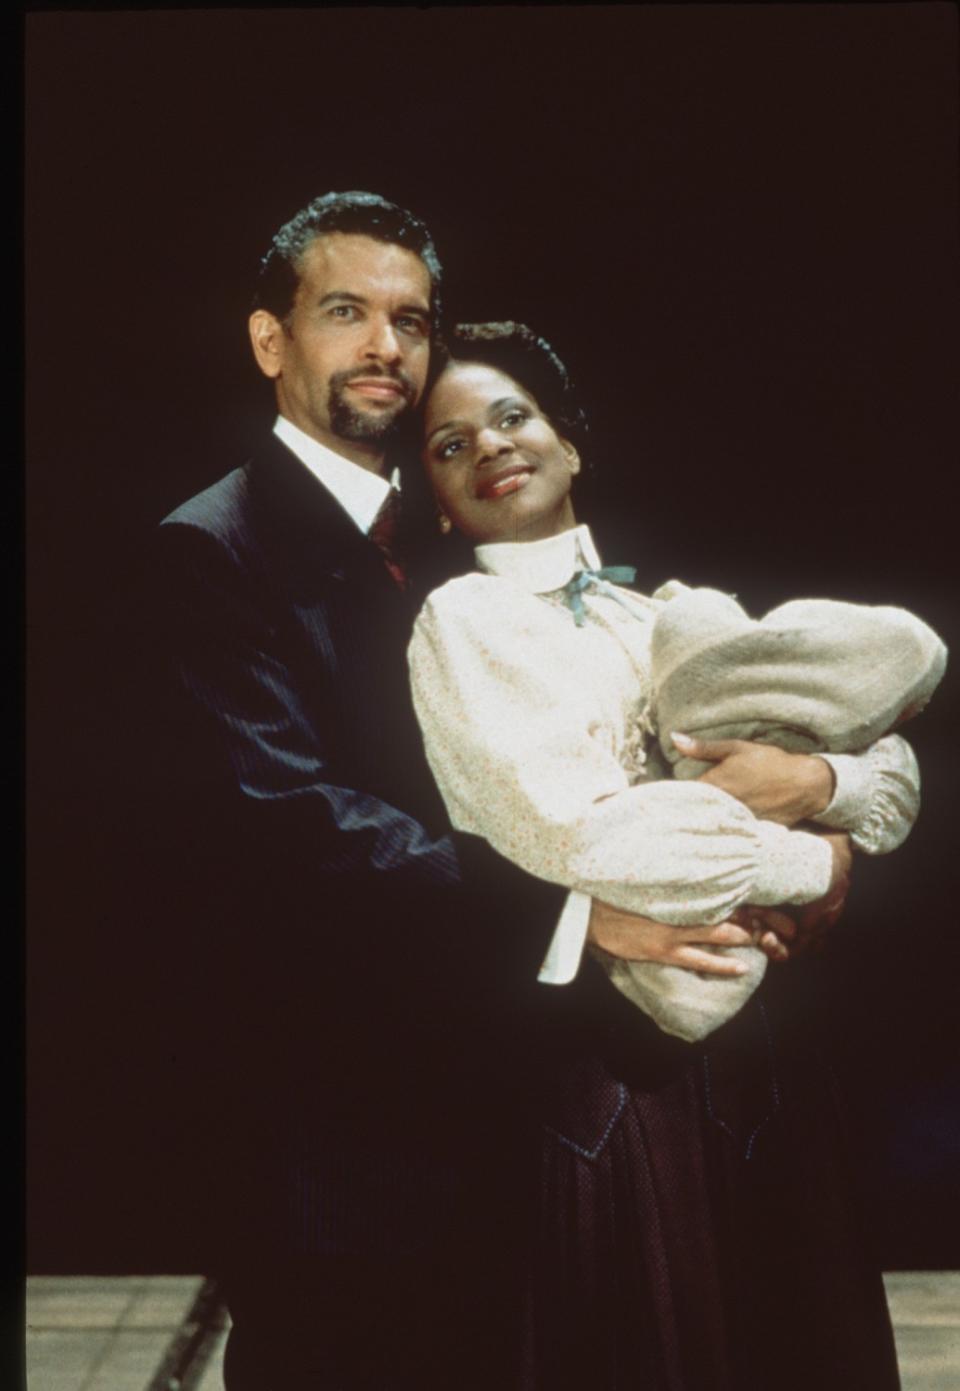 Brian Stokes Mitchell and Audra McDonald were among the original cast of "Ragtime."